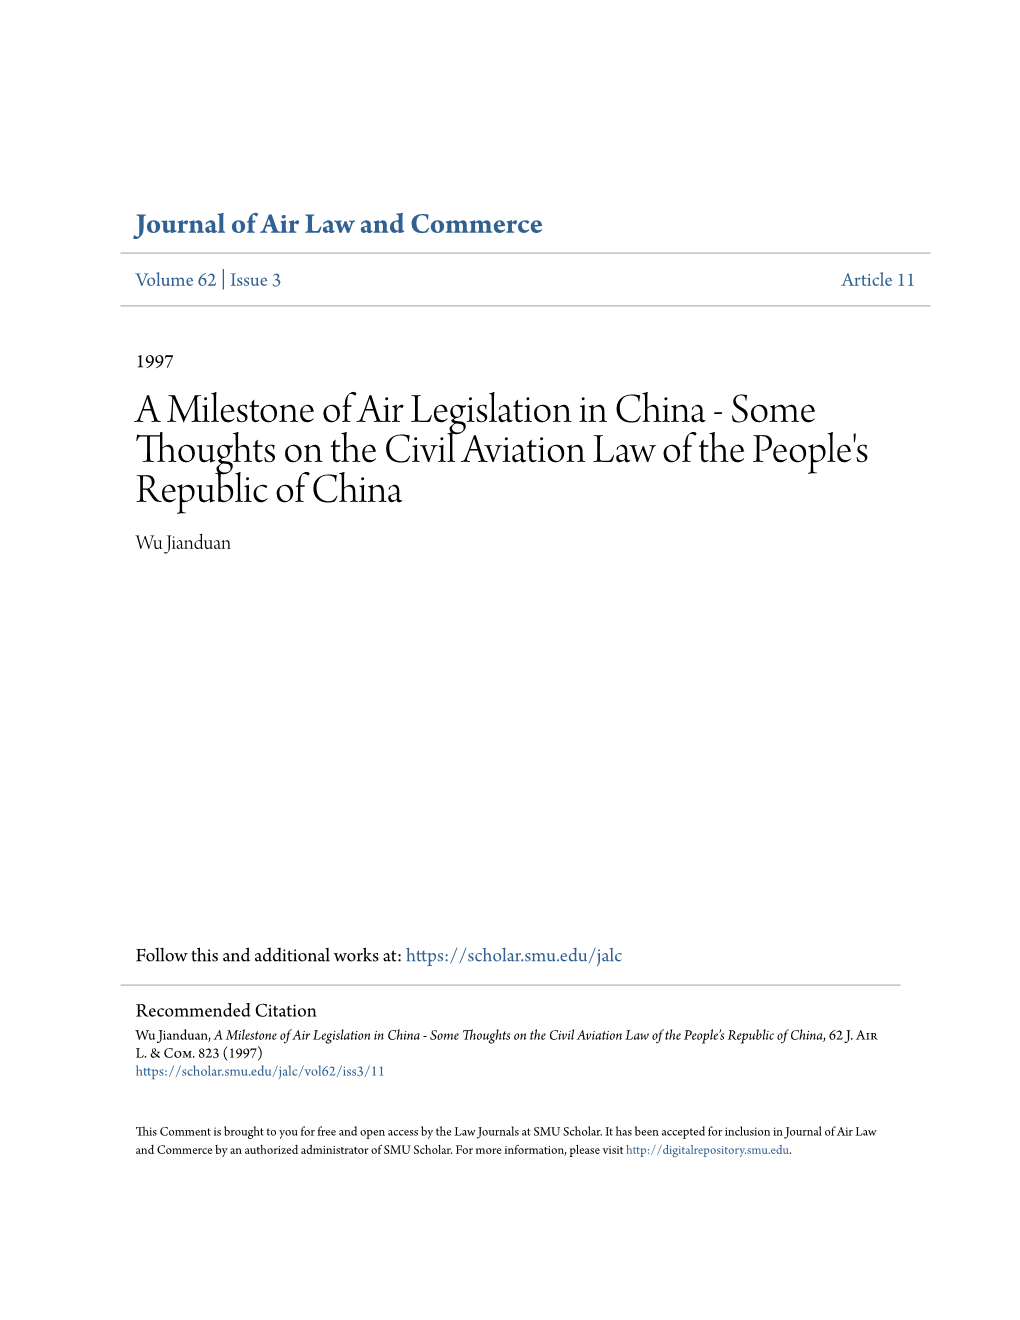 Some Thoughts on the Civil Aviation Law of the People's Republic of China Wu Jianduan